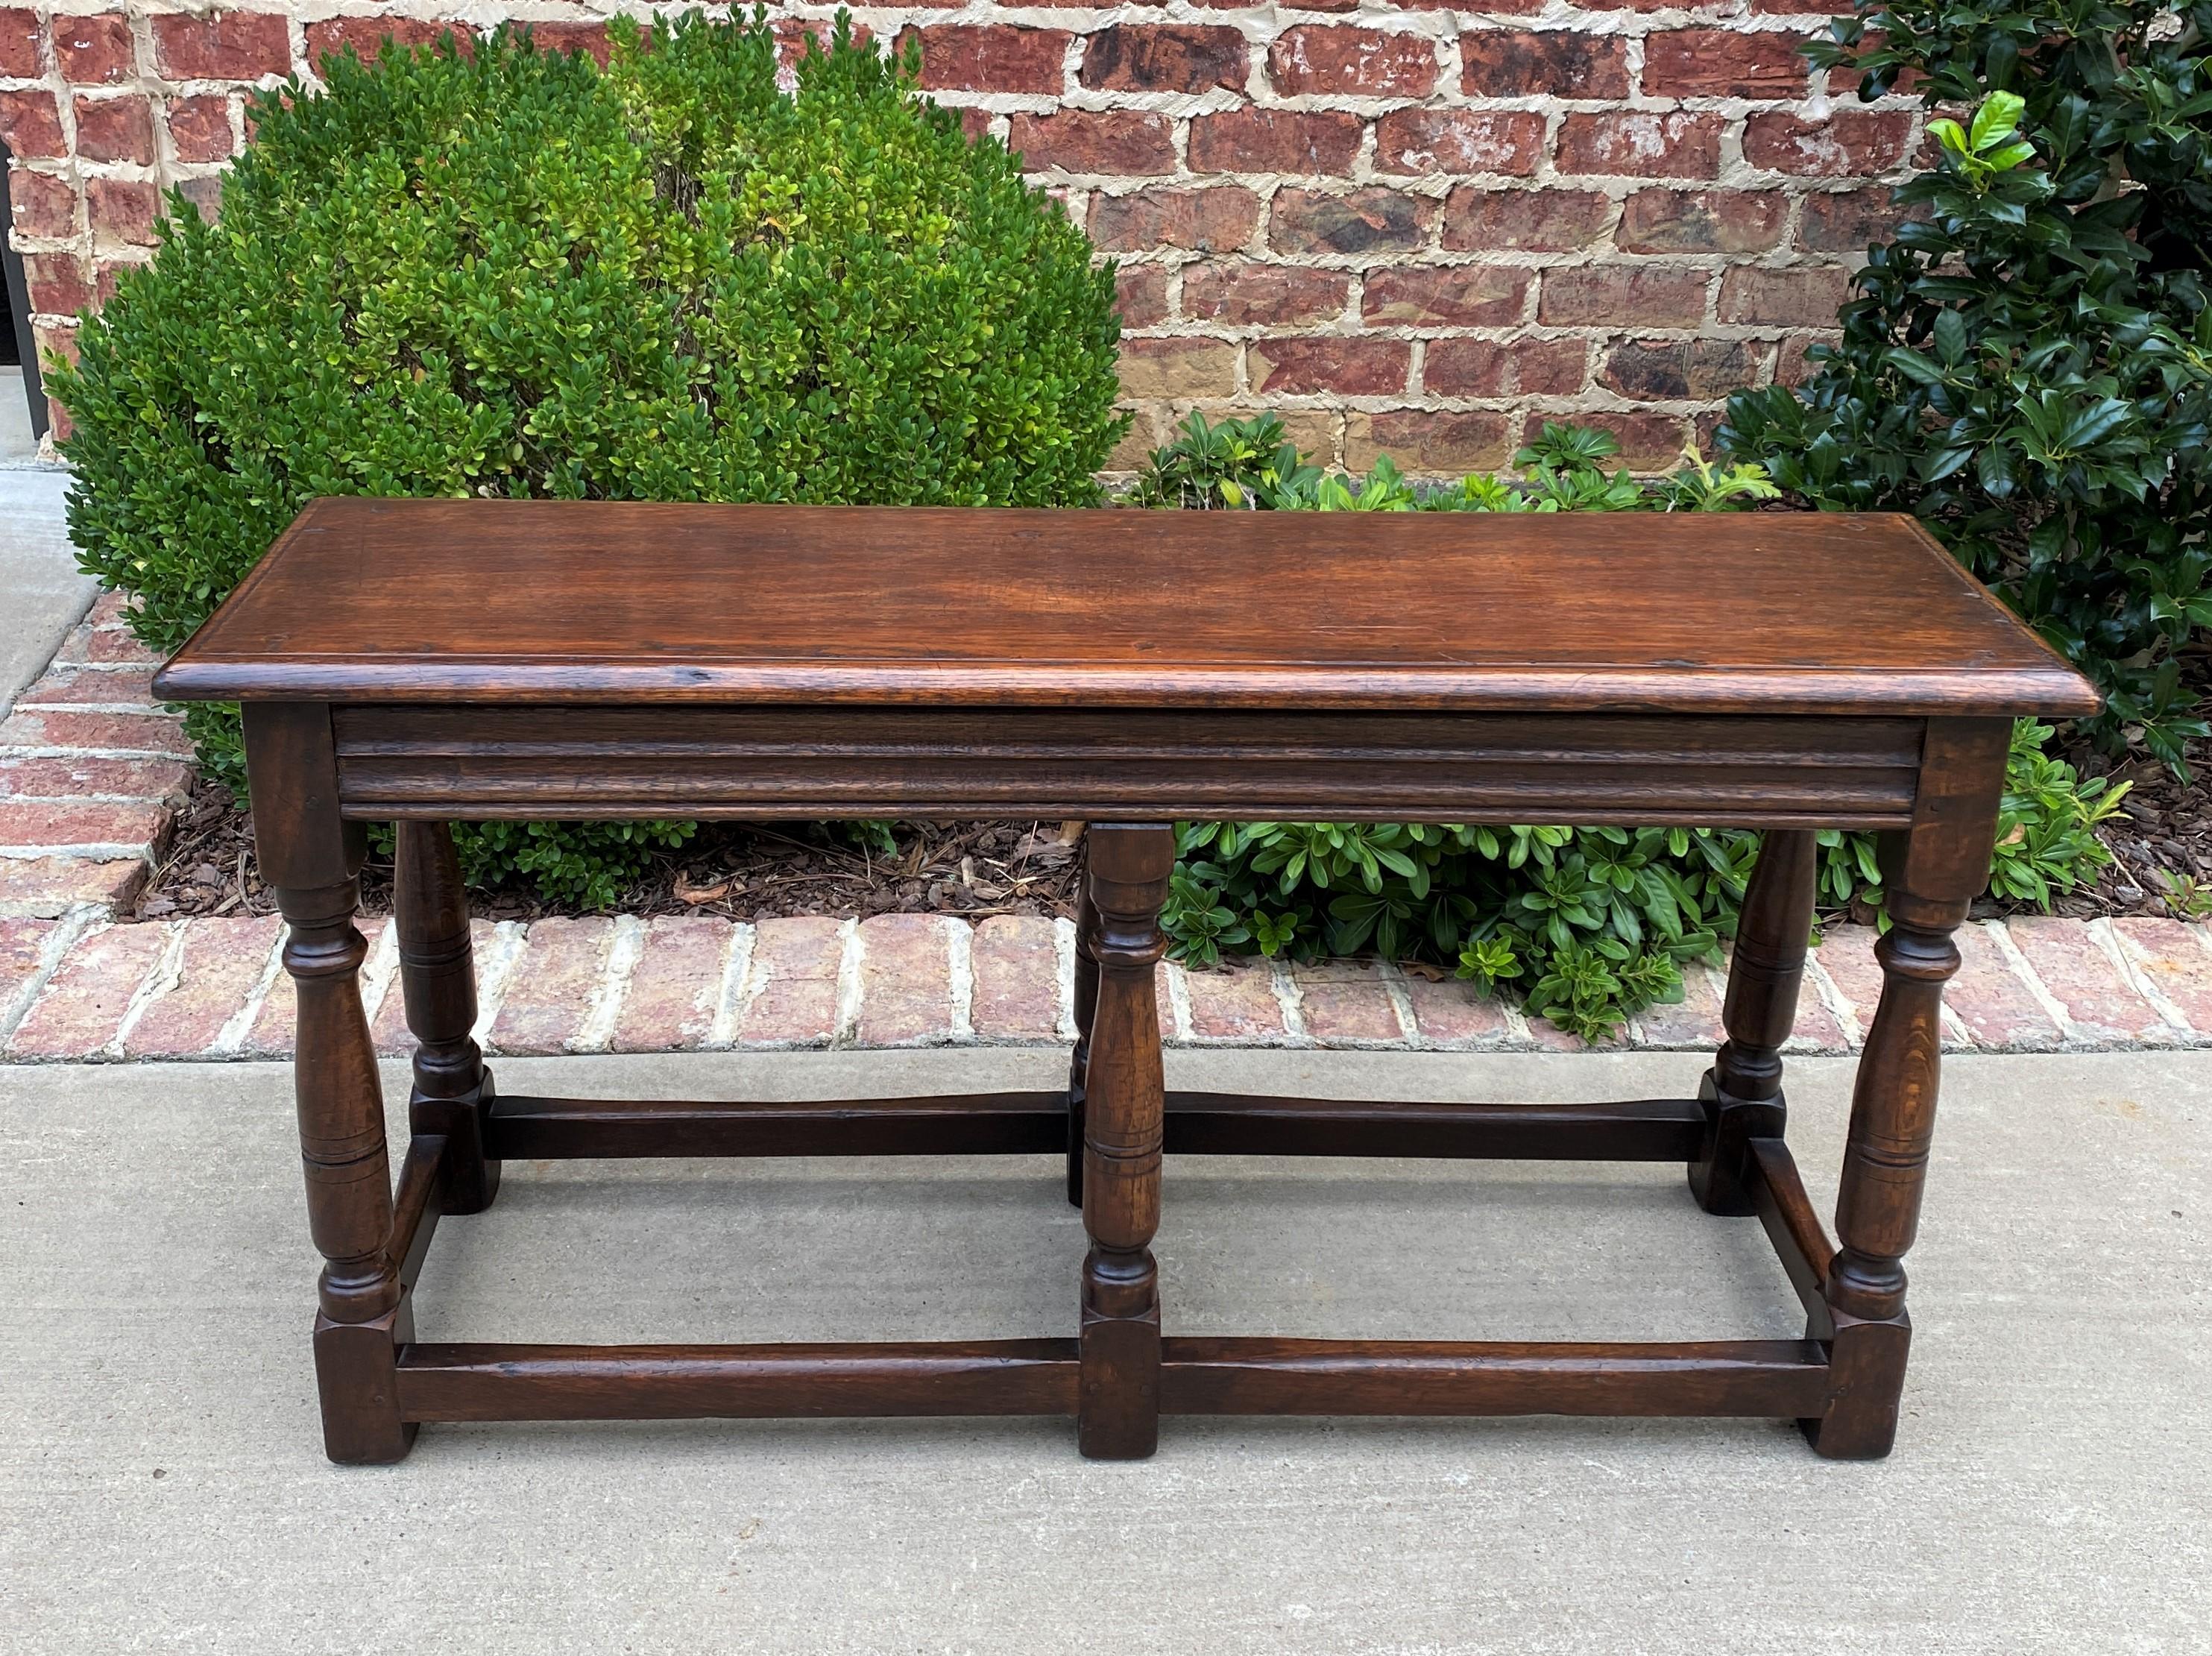 Charming antique English oak bench or stool~~Pegged Construction~~c. 1920s

Classic British flair decorator piece~~beveled edge top with turned post legs and sturdy stretcher~~old pegged construction~~always in high demand!

Perfect for a living